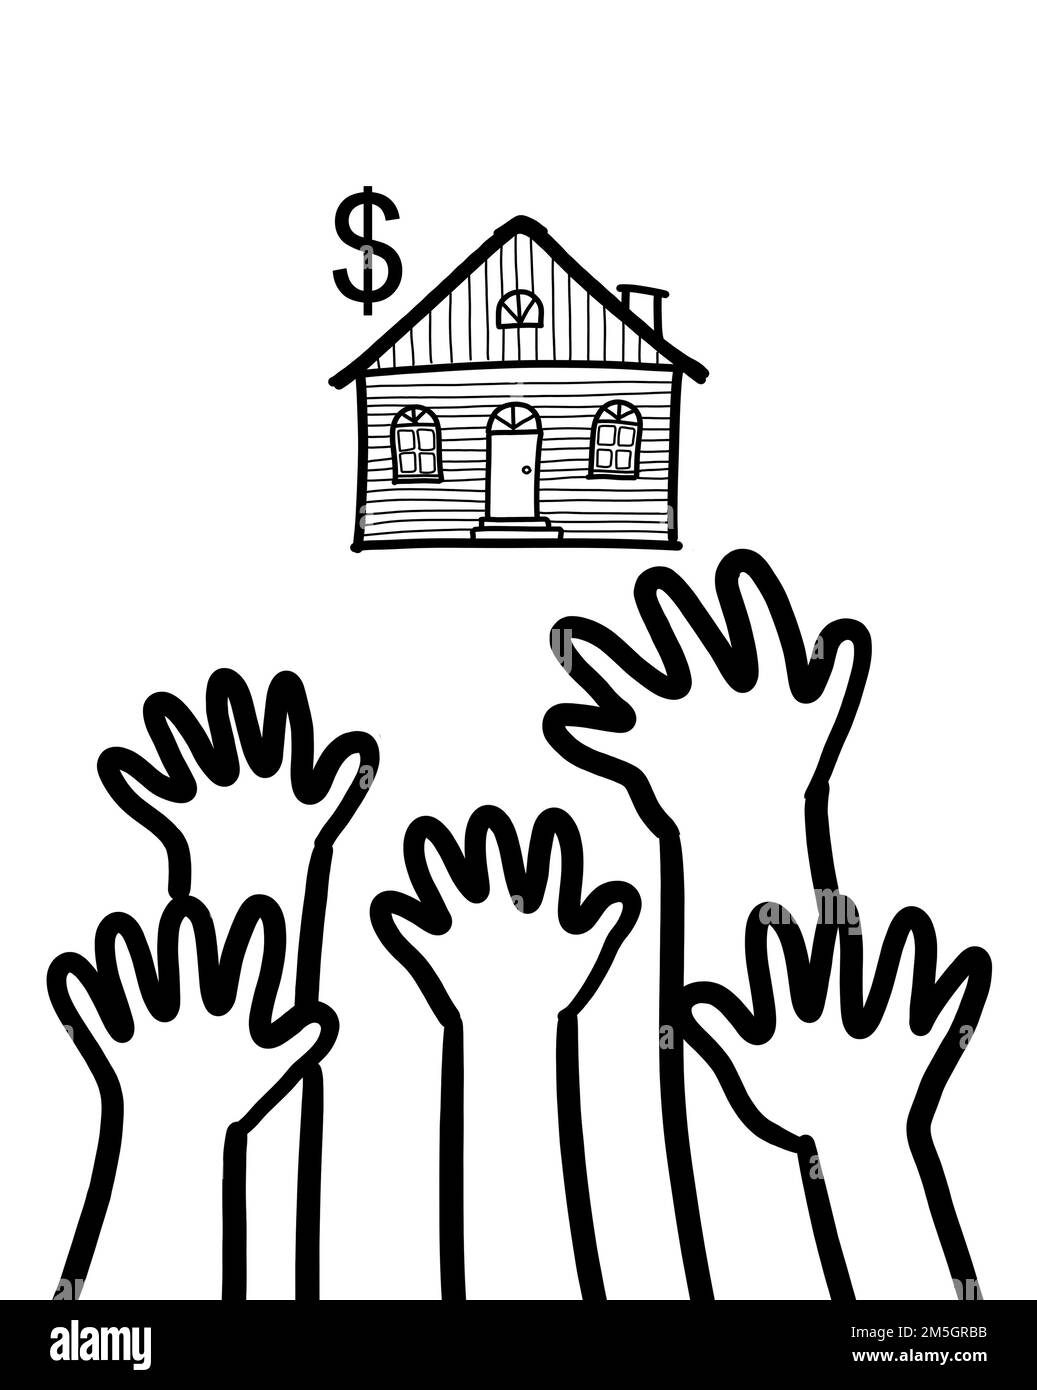 A group of people hands reaching up a house property. Affordability for housing and home ownership concept. Stock Photo